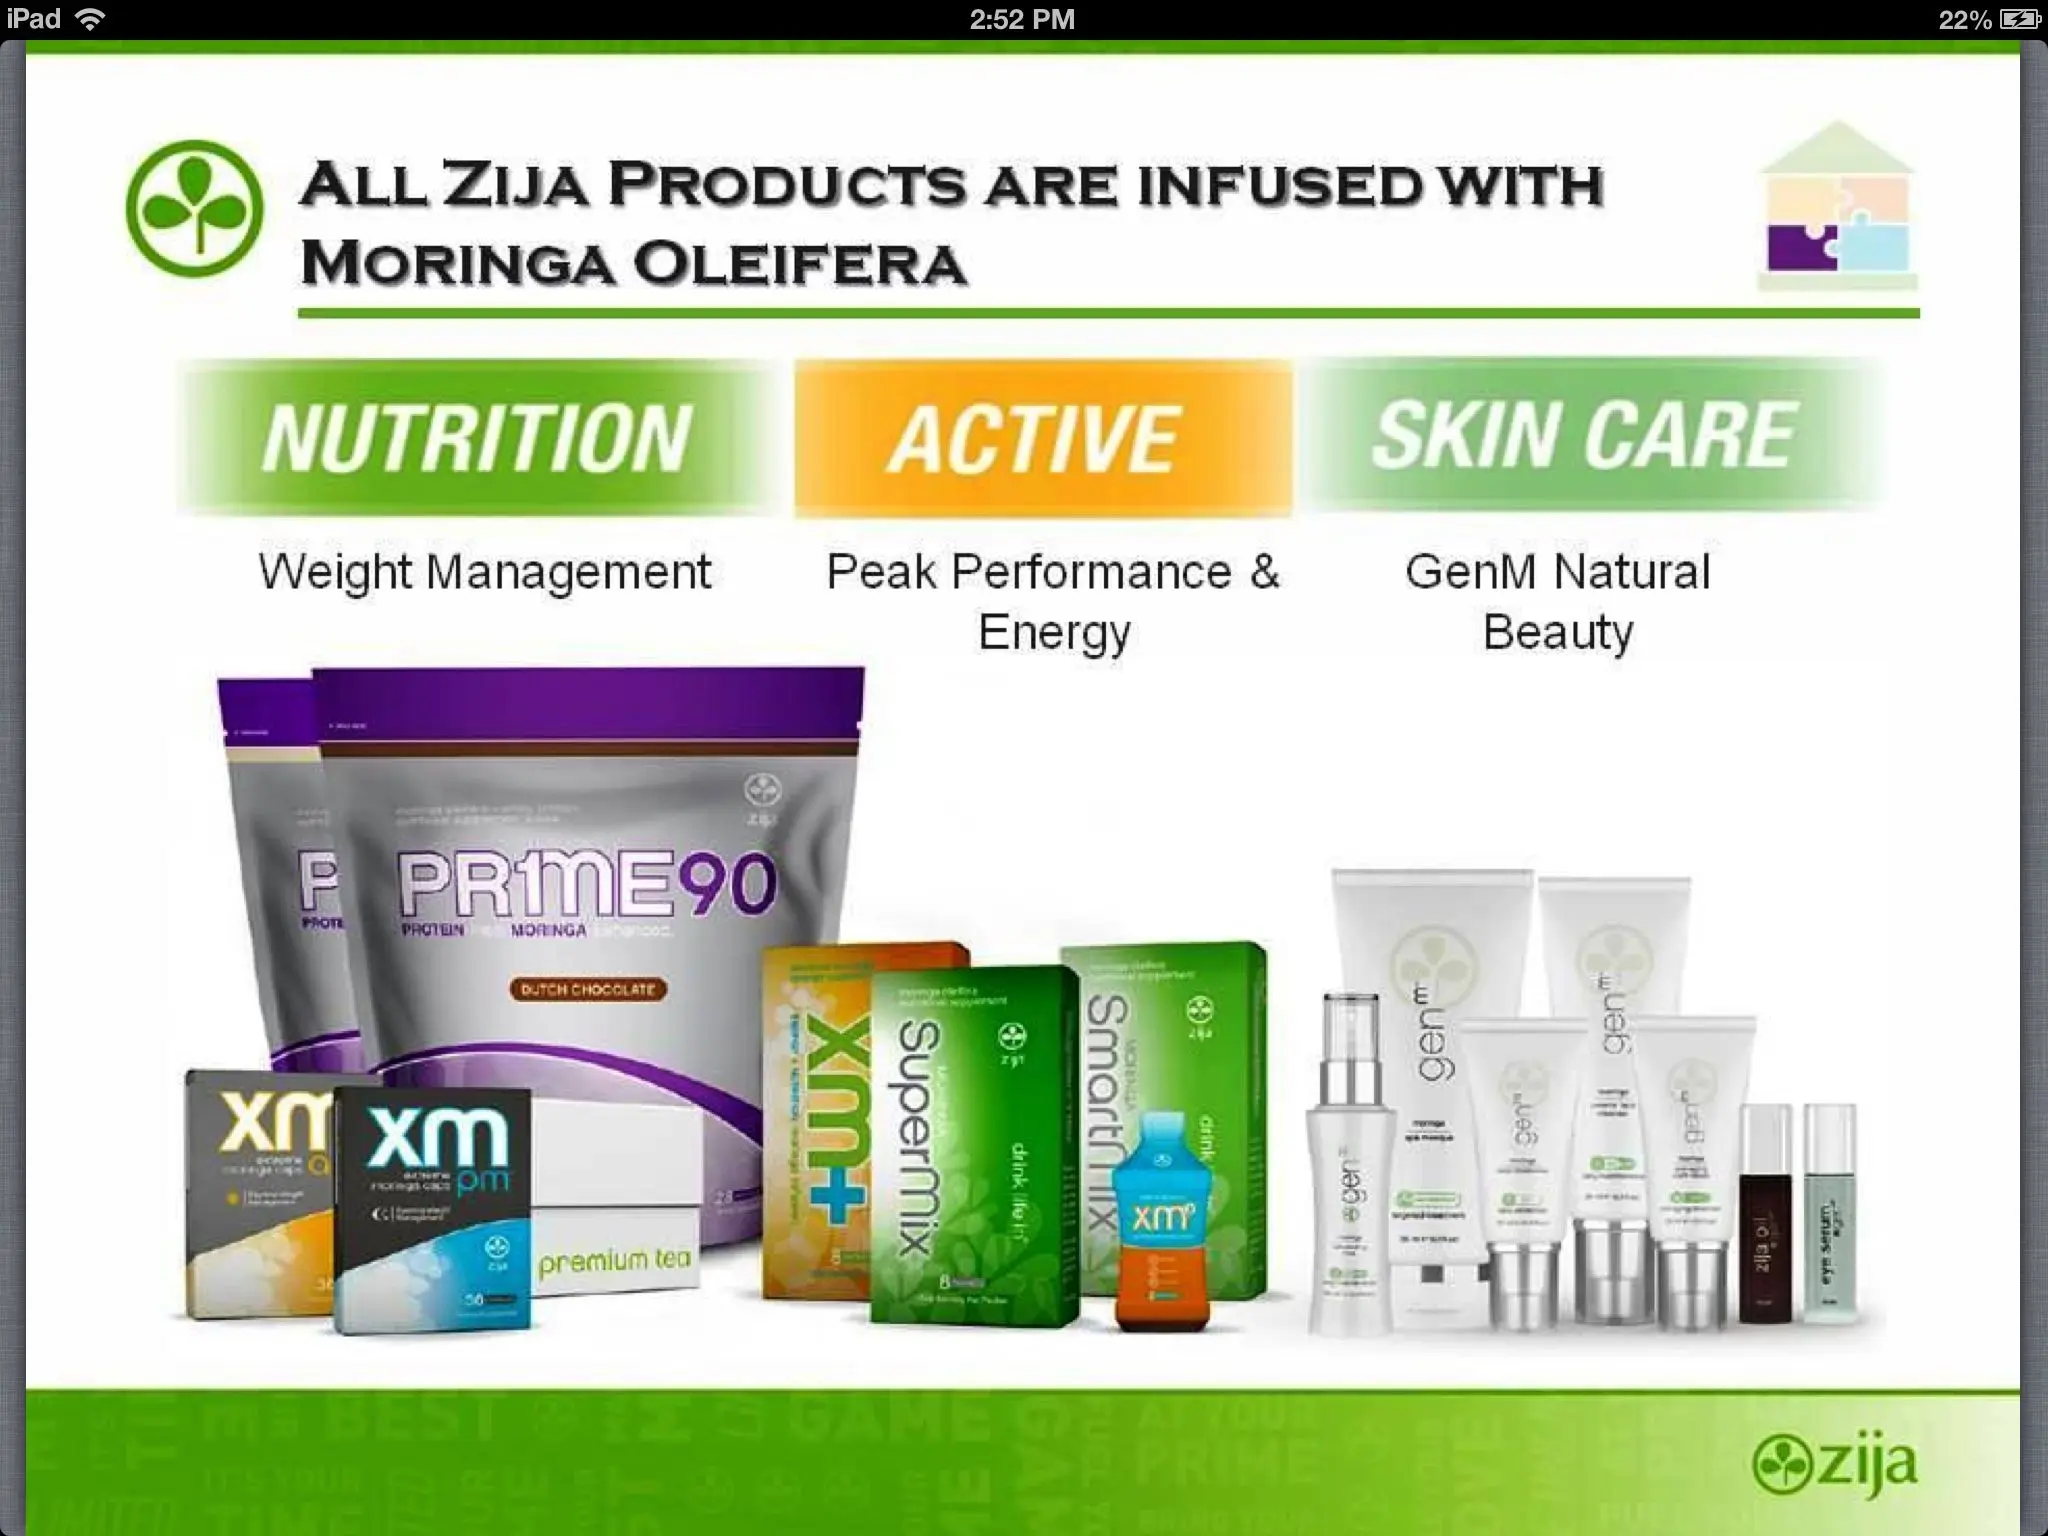 What Are The Zija International Products